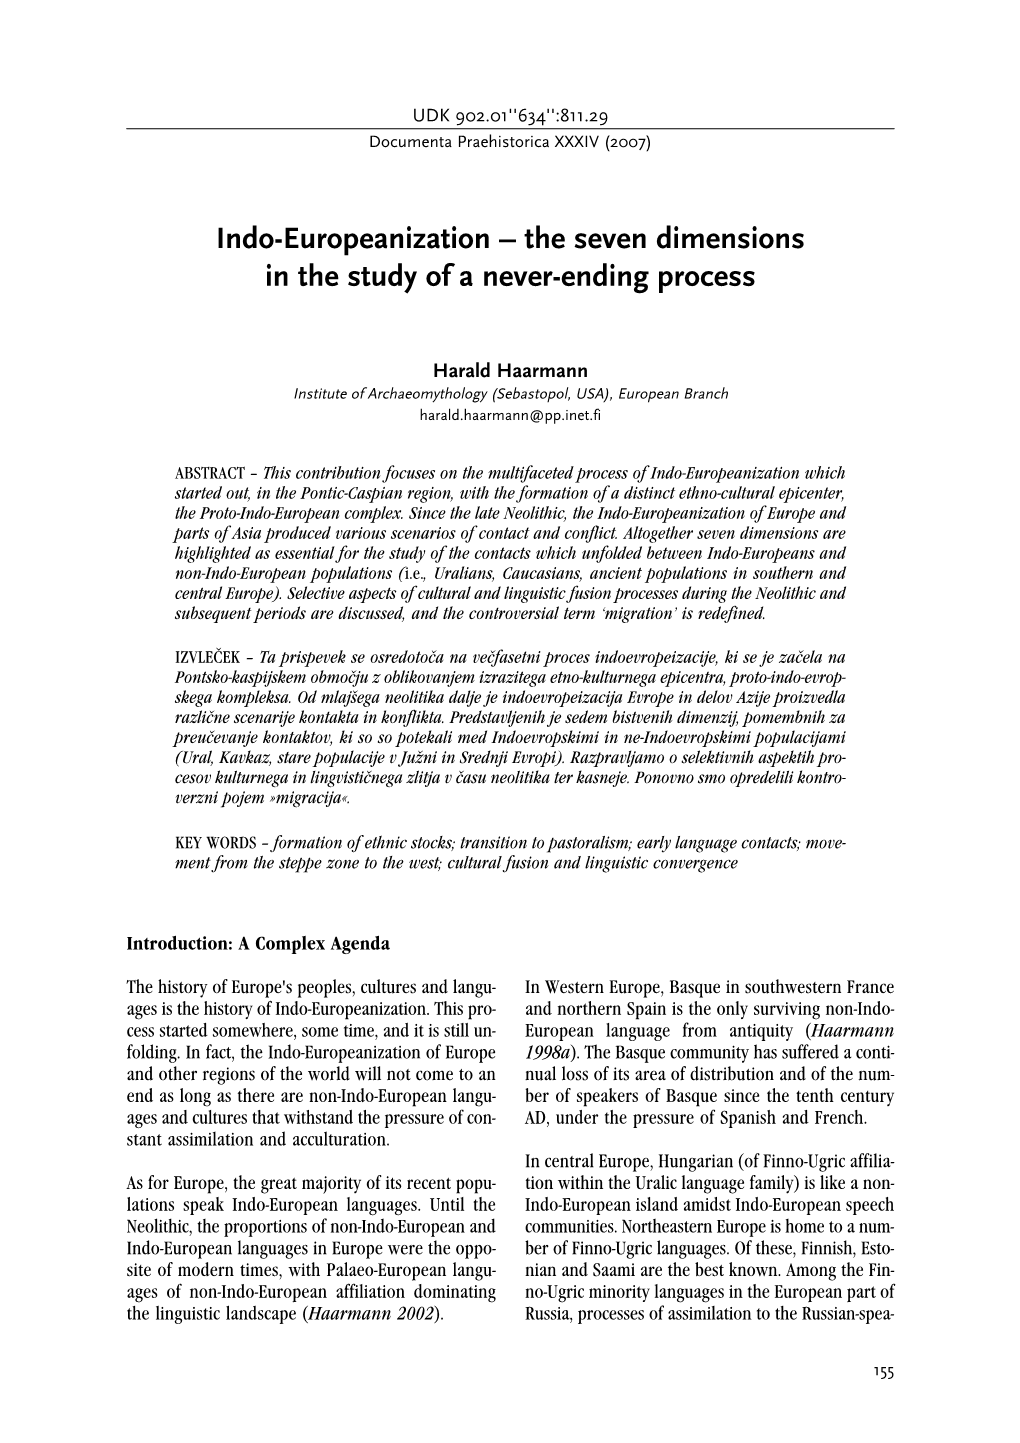 Indo-Europeanization – the Seven Dimensions in the Study of a Never-Ending Process